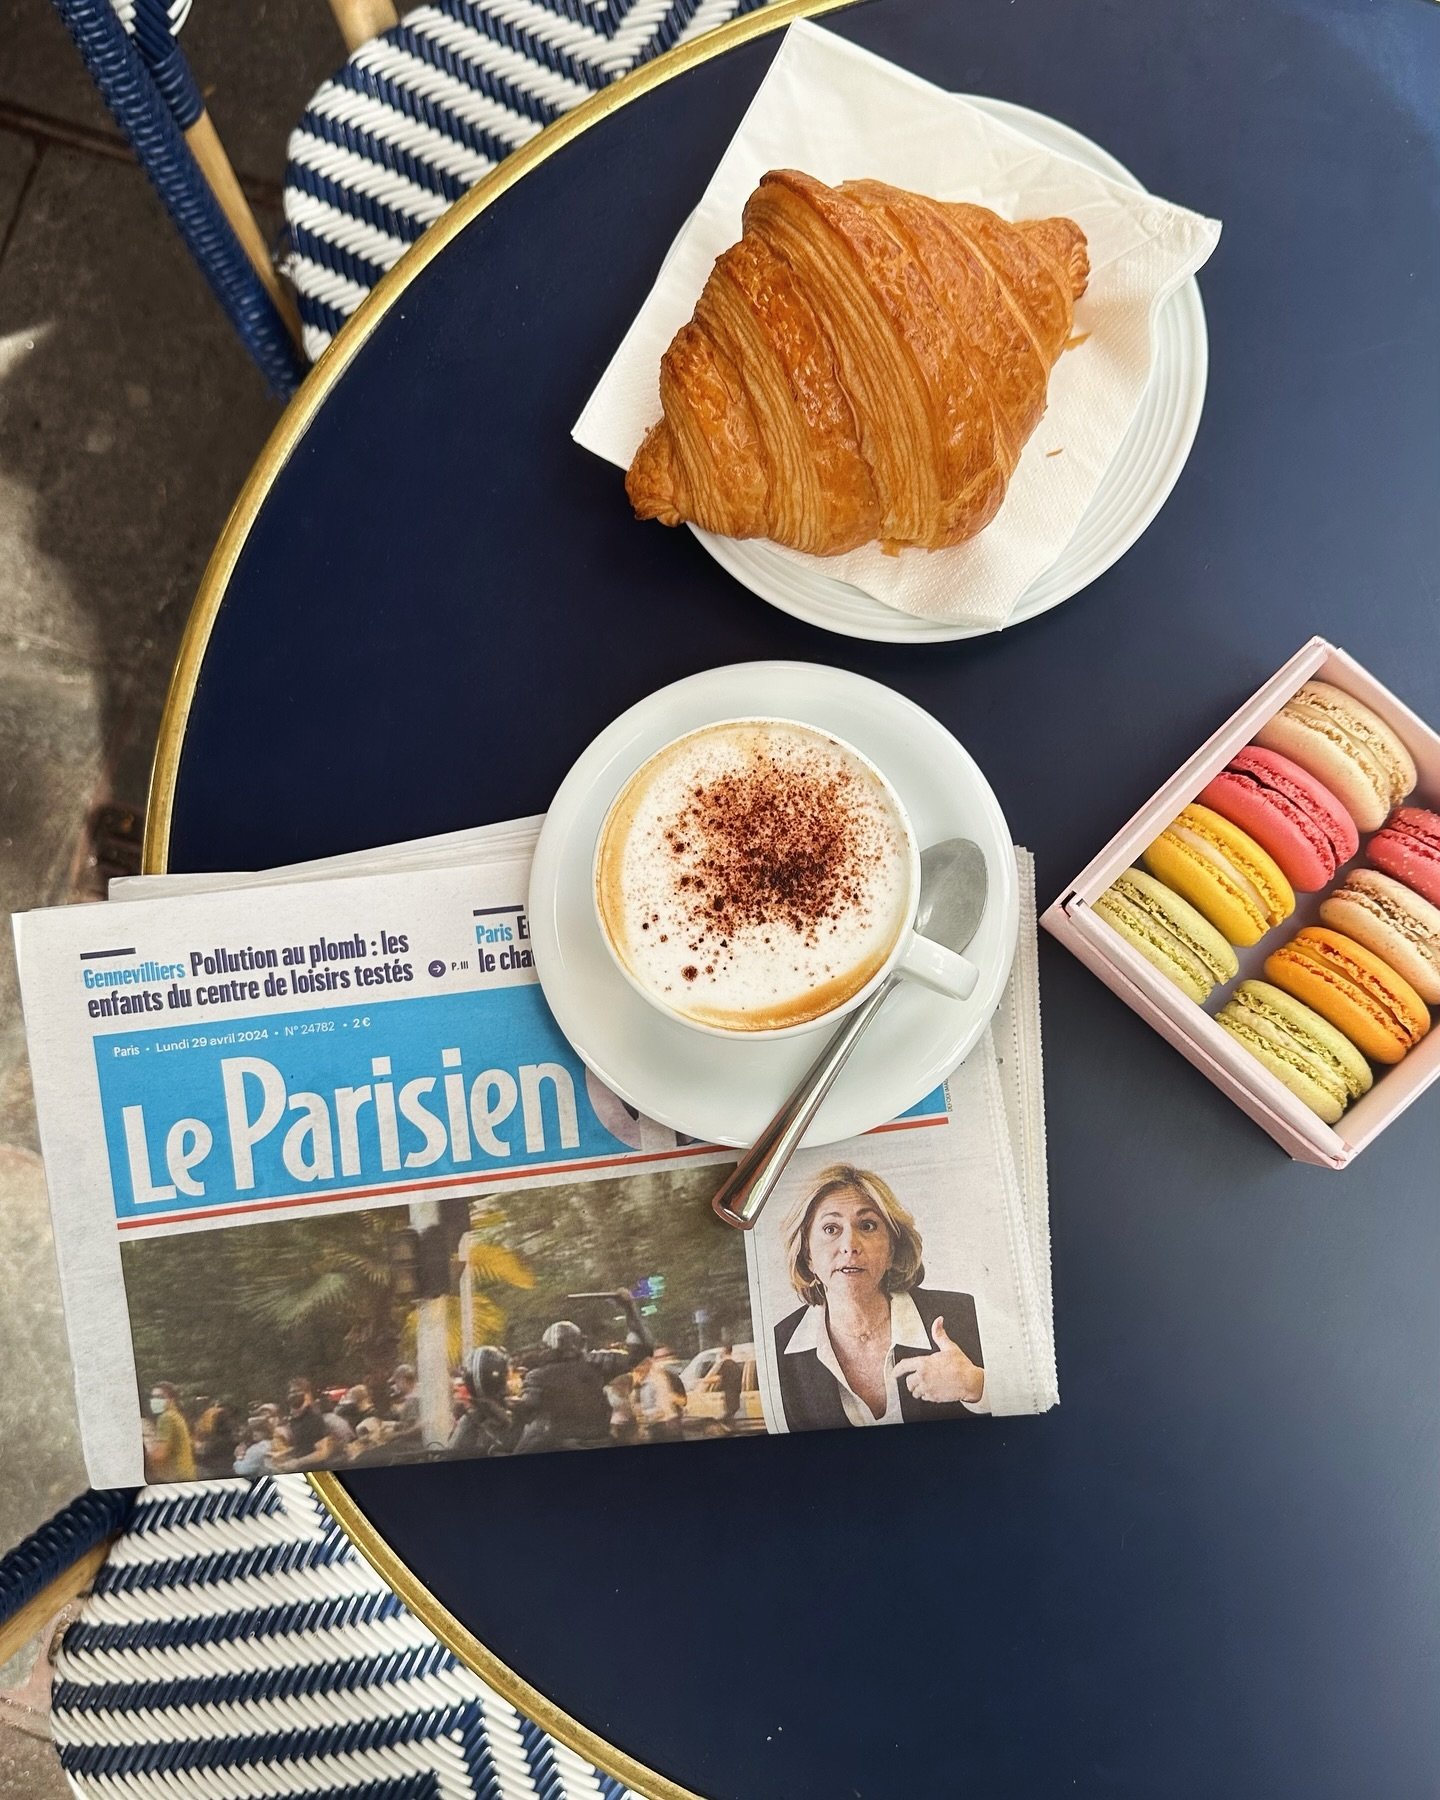 Could you make time to sit down for a coffee every day? I am always surprised by how rare it is to see the French walking around with to-go coffee. As an American, on-the-go culture is such a big part of our lives. But since moving to France, I&rsquo